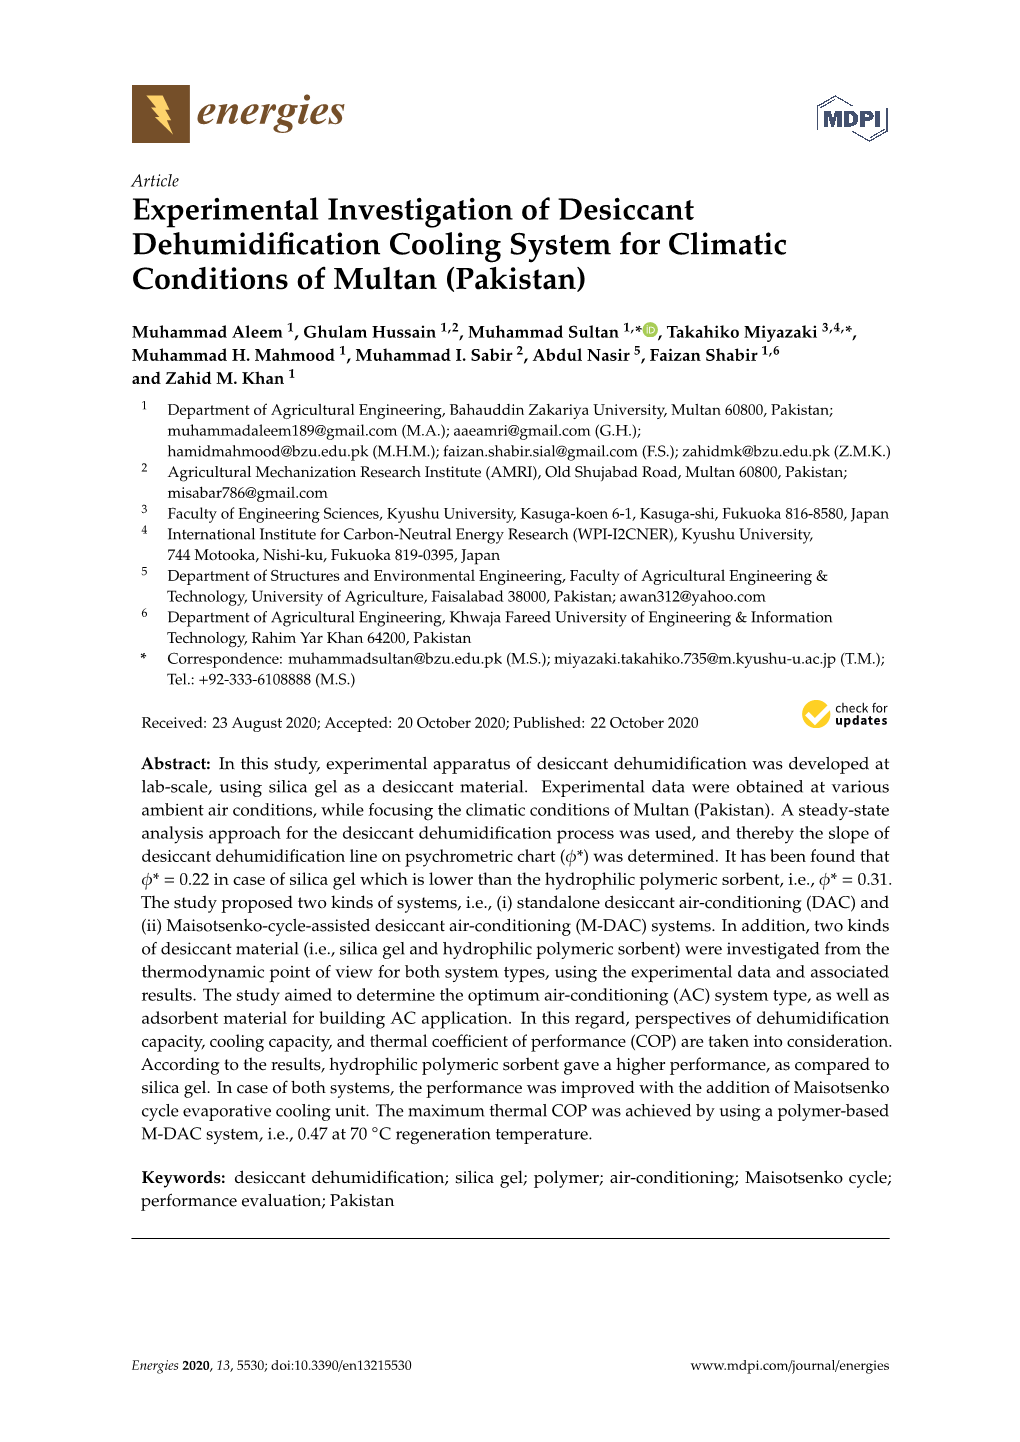 Experimental Investigation of Desiccant Dehumidification Cooling